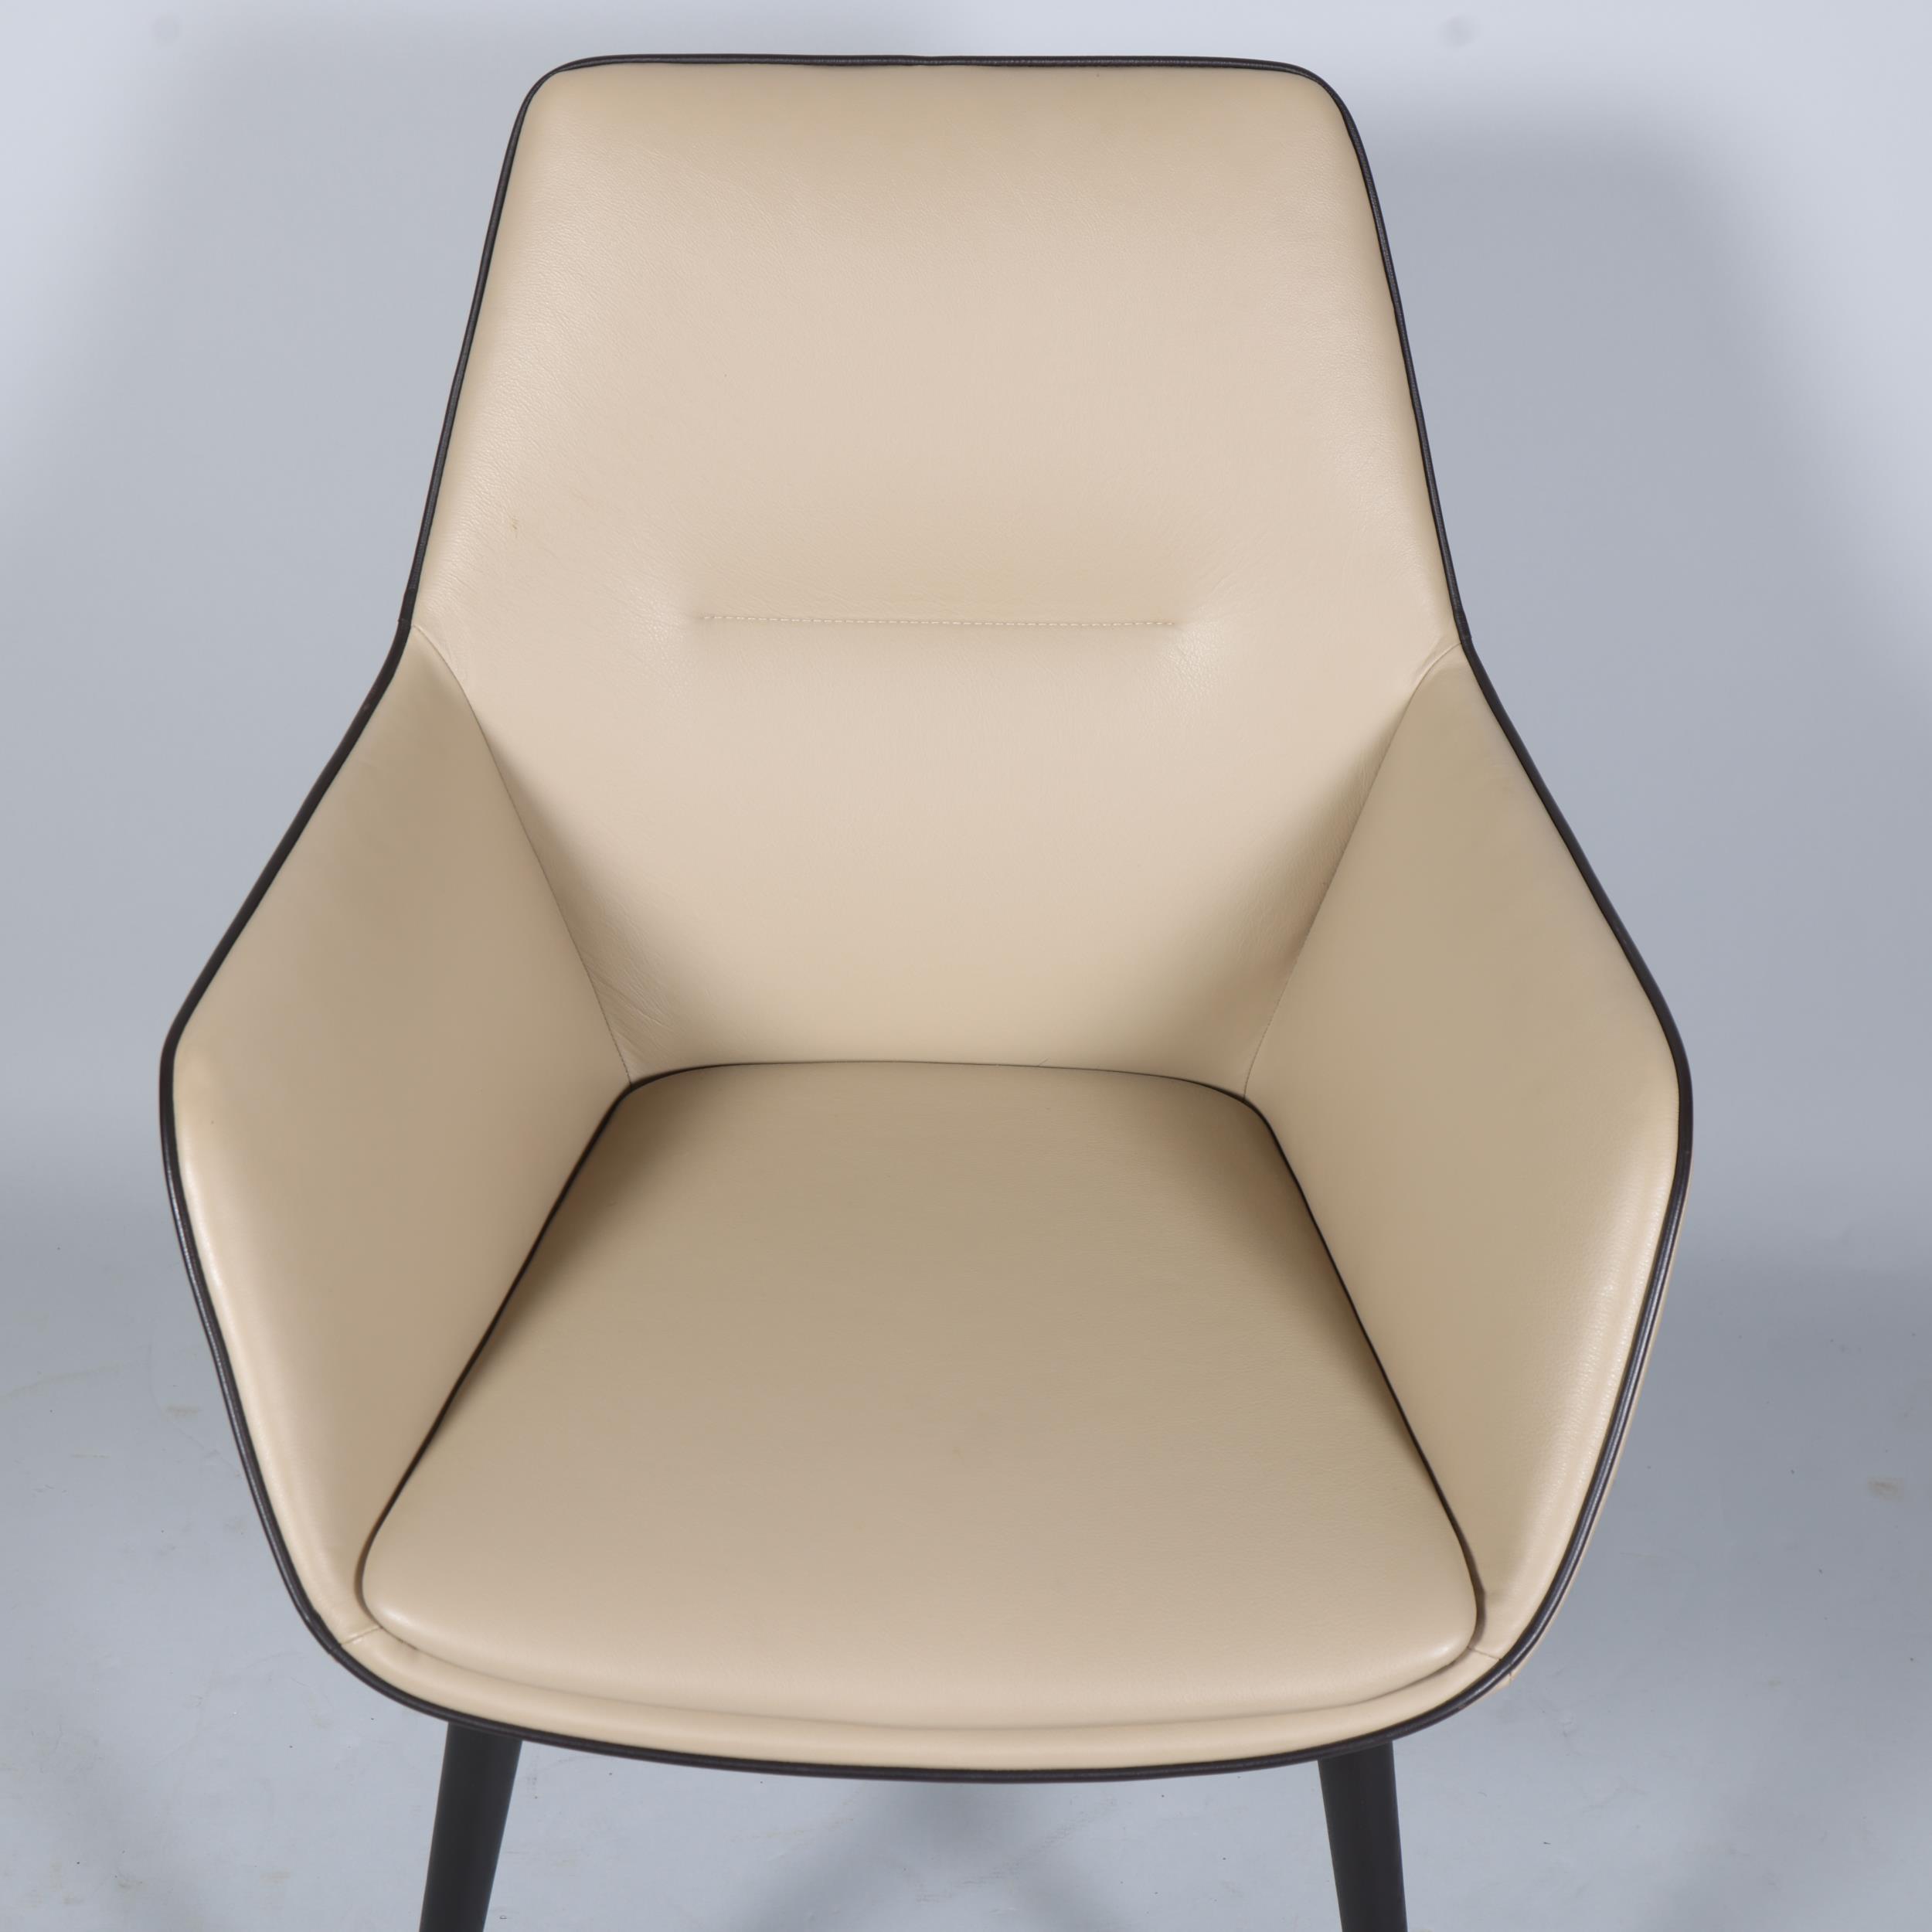 Jehs and Laub, a contemporary design Ray Soft armchair in fine leather by Brunner, Germany, with - Image 2 of 4